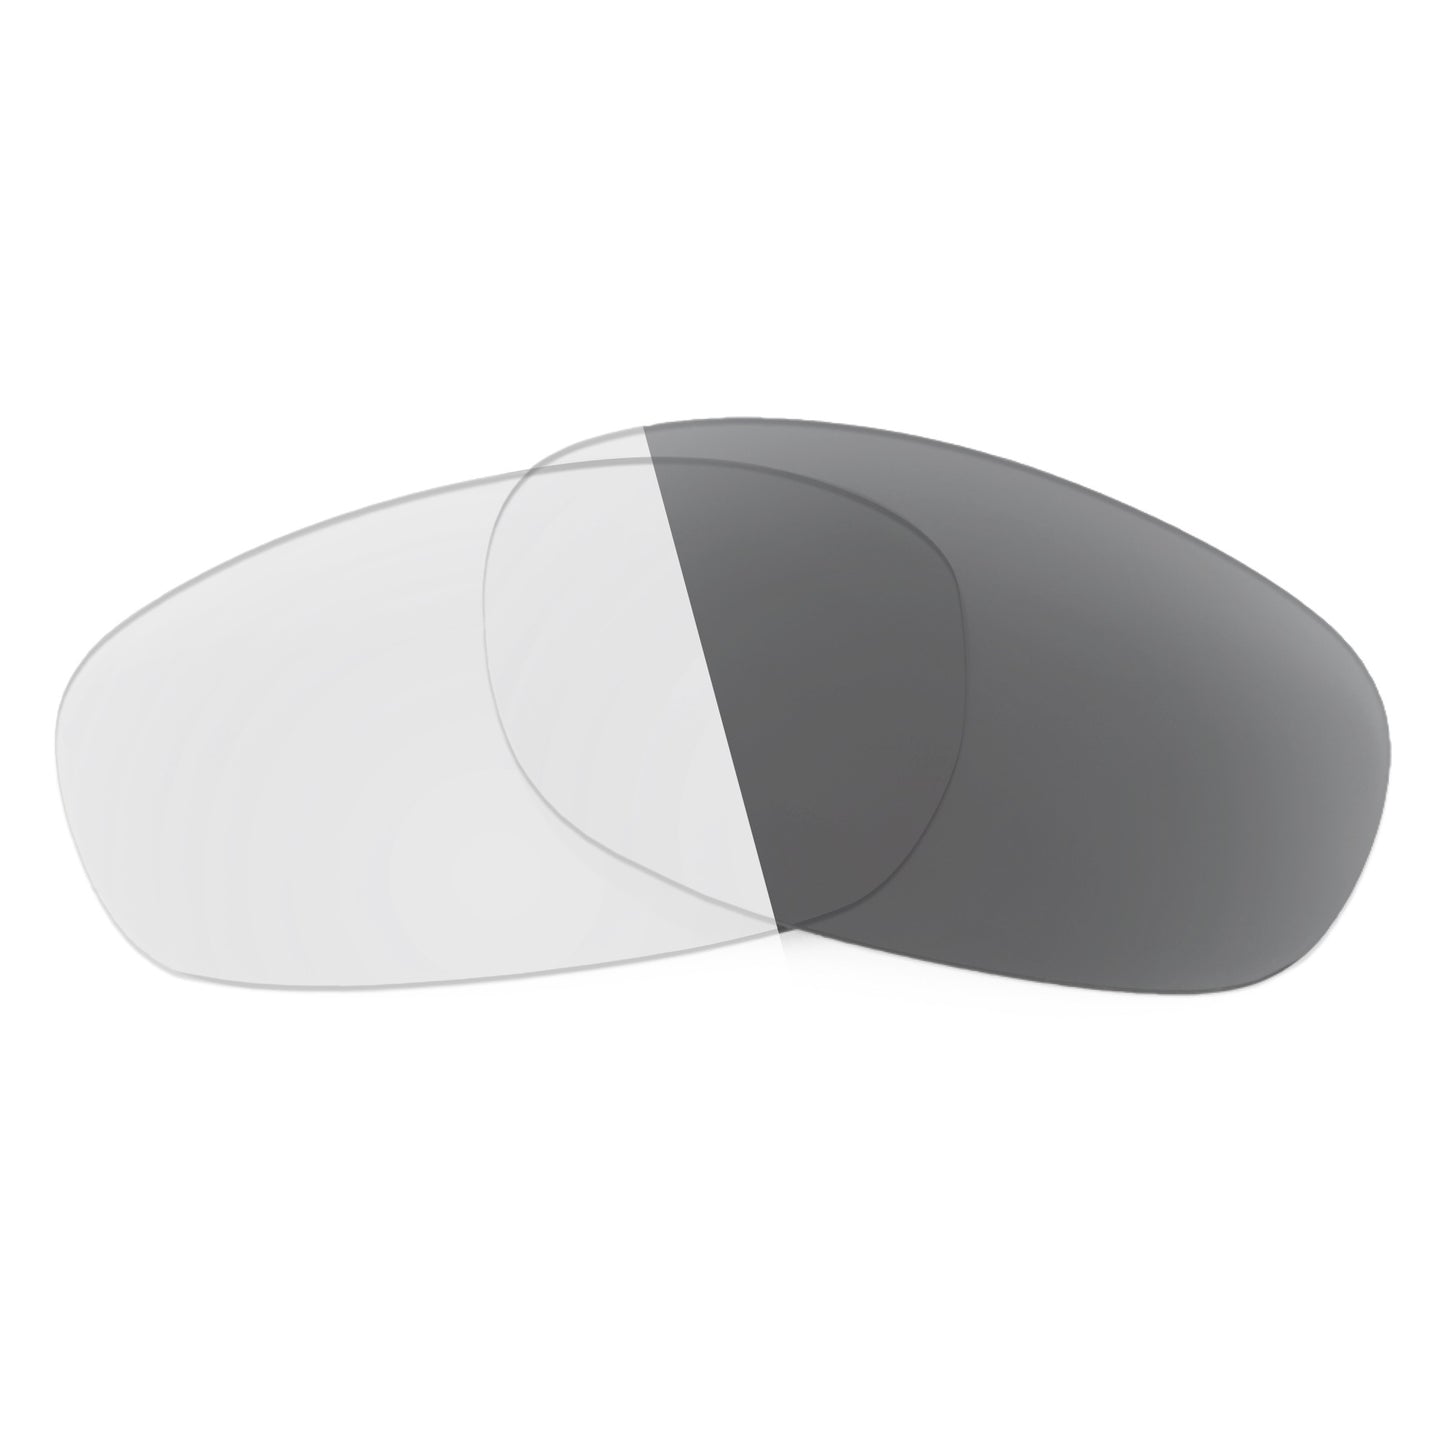 Revant replacement lenses for Ray-Ban RB3534 62mm Non-Polarized Adapt Gray Photochromic